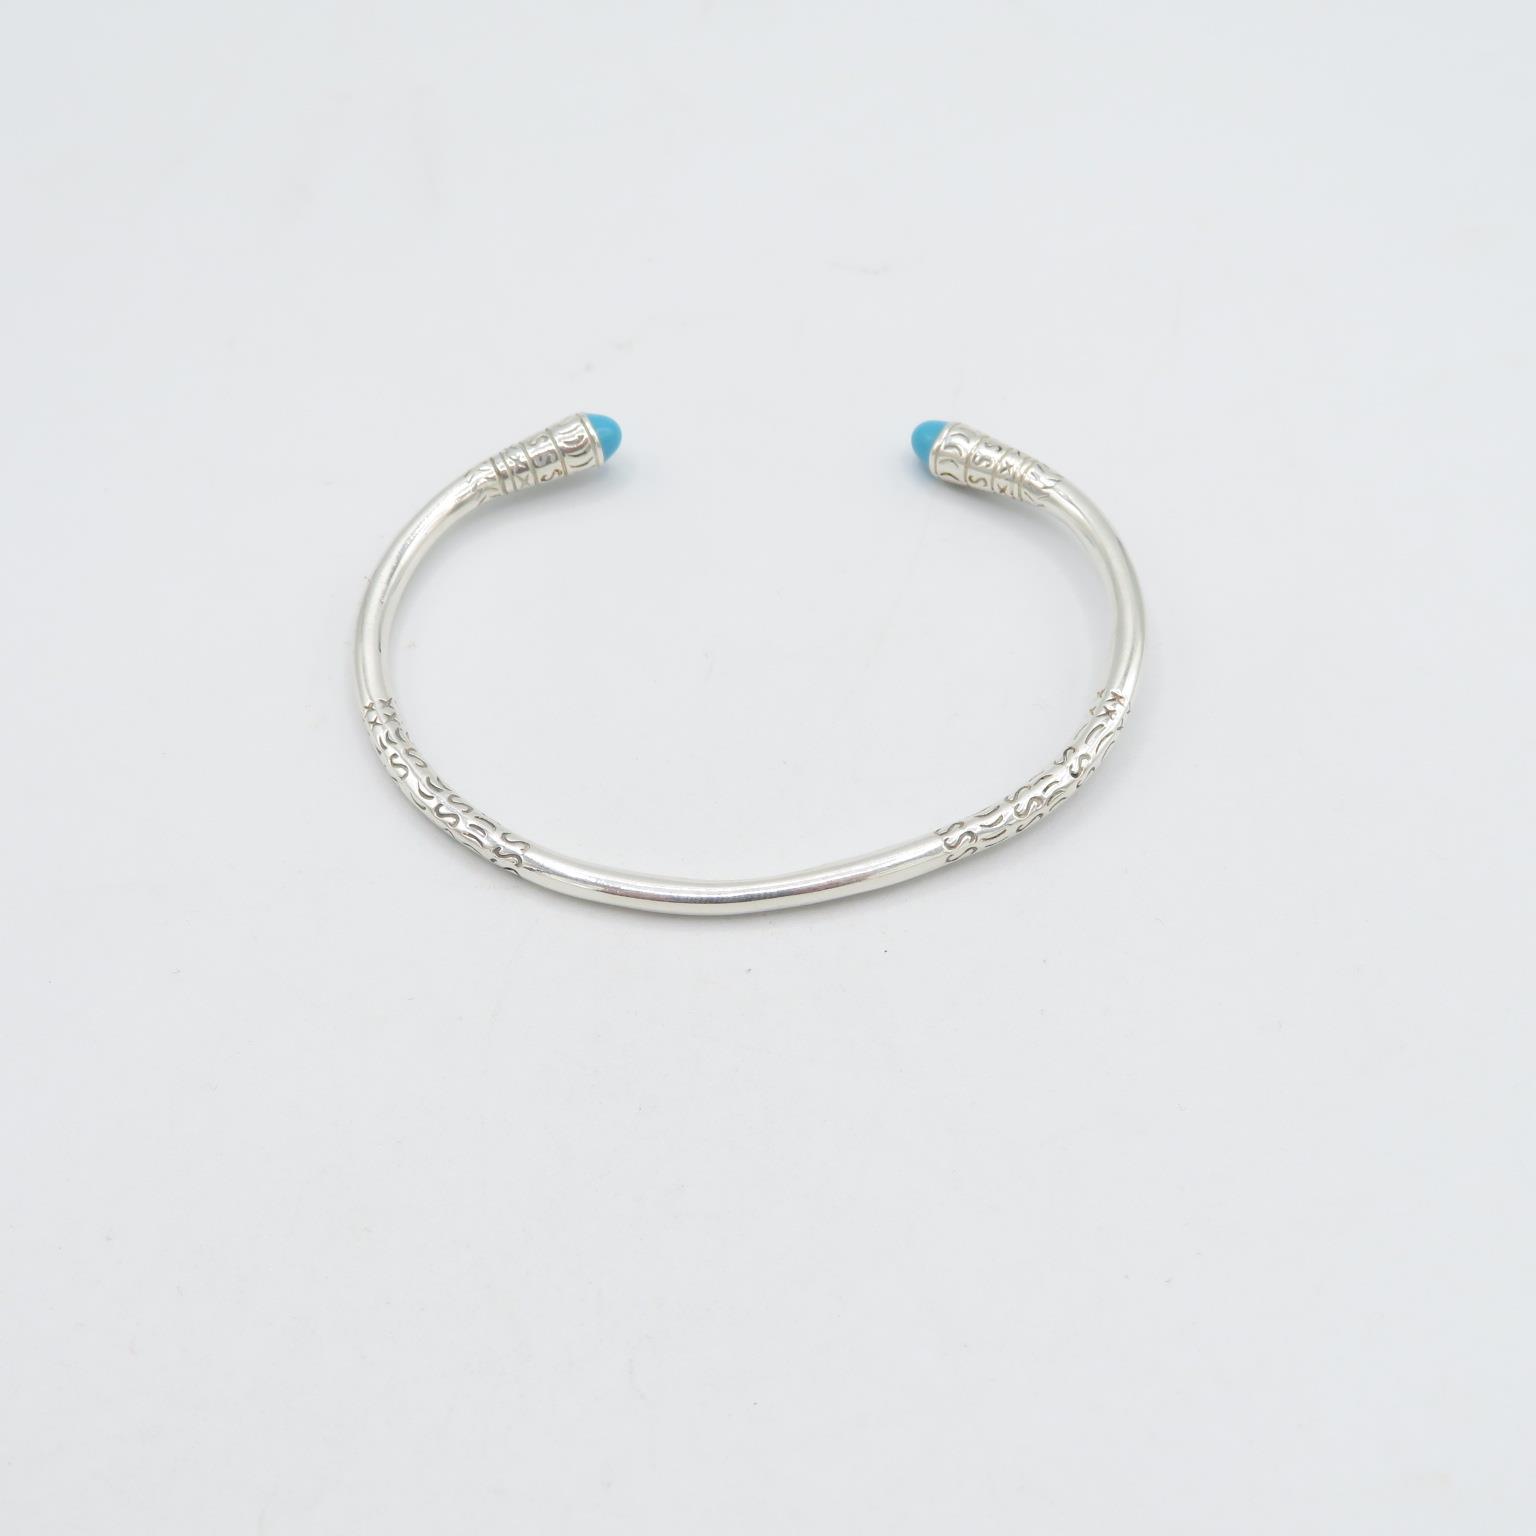 HM 925 Sterling Silver engraved bangle set with turquoise stones - adjustable - (20g) In excellent - Bild 2 aus 5